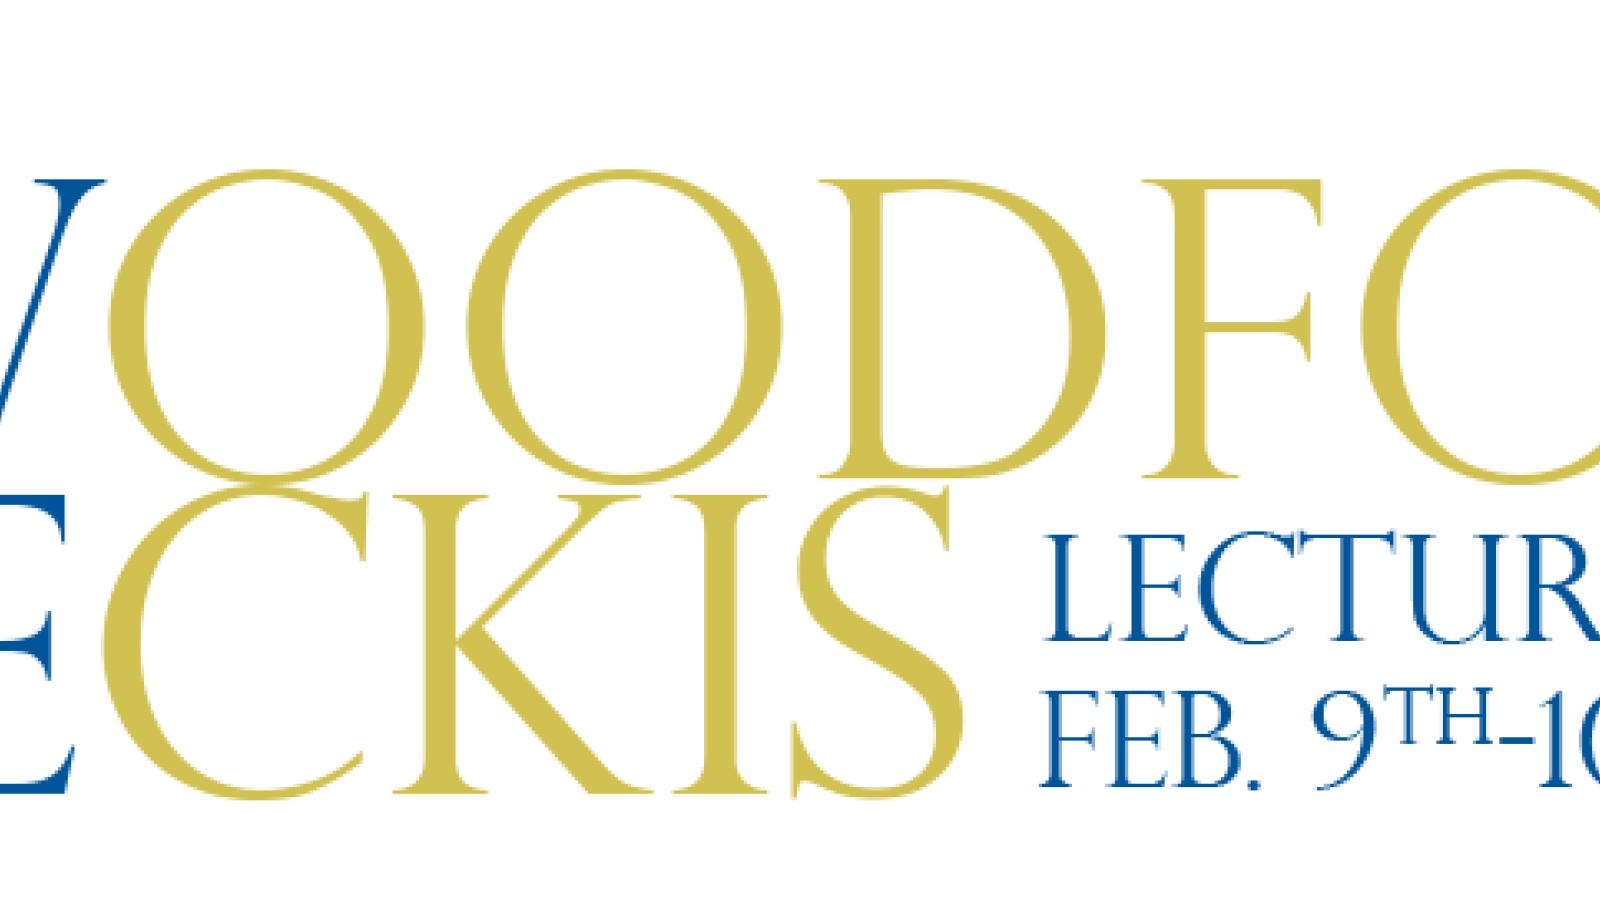 Logo showing dates for Lectureship